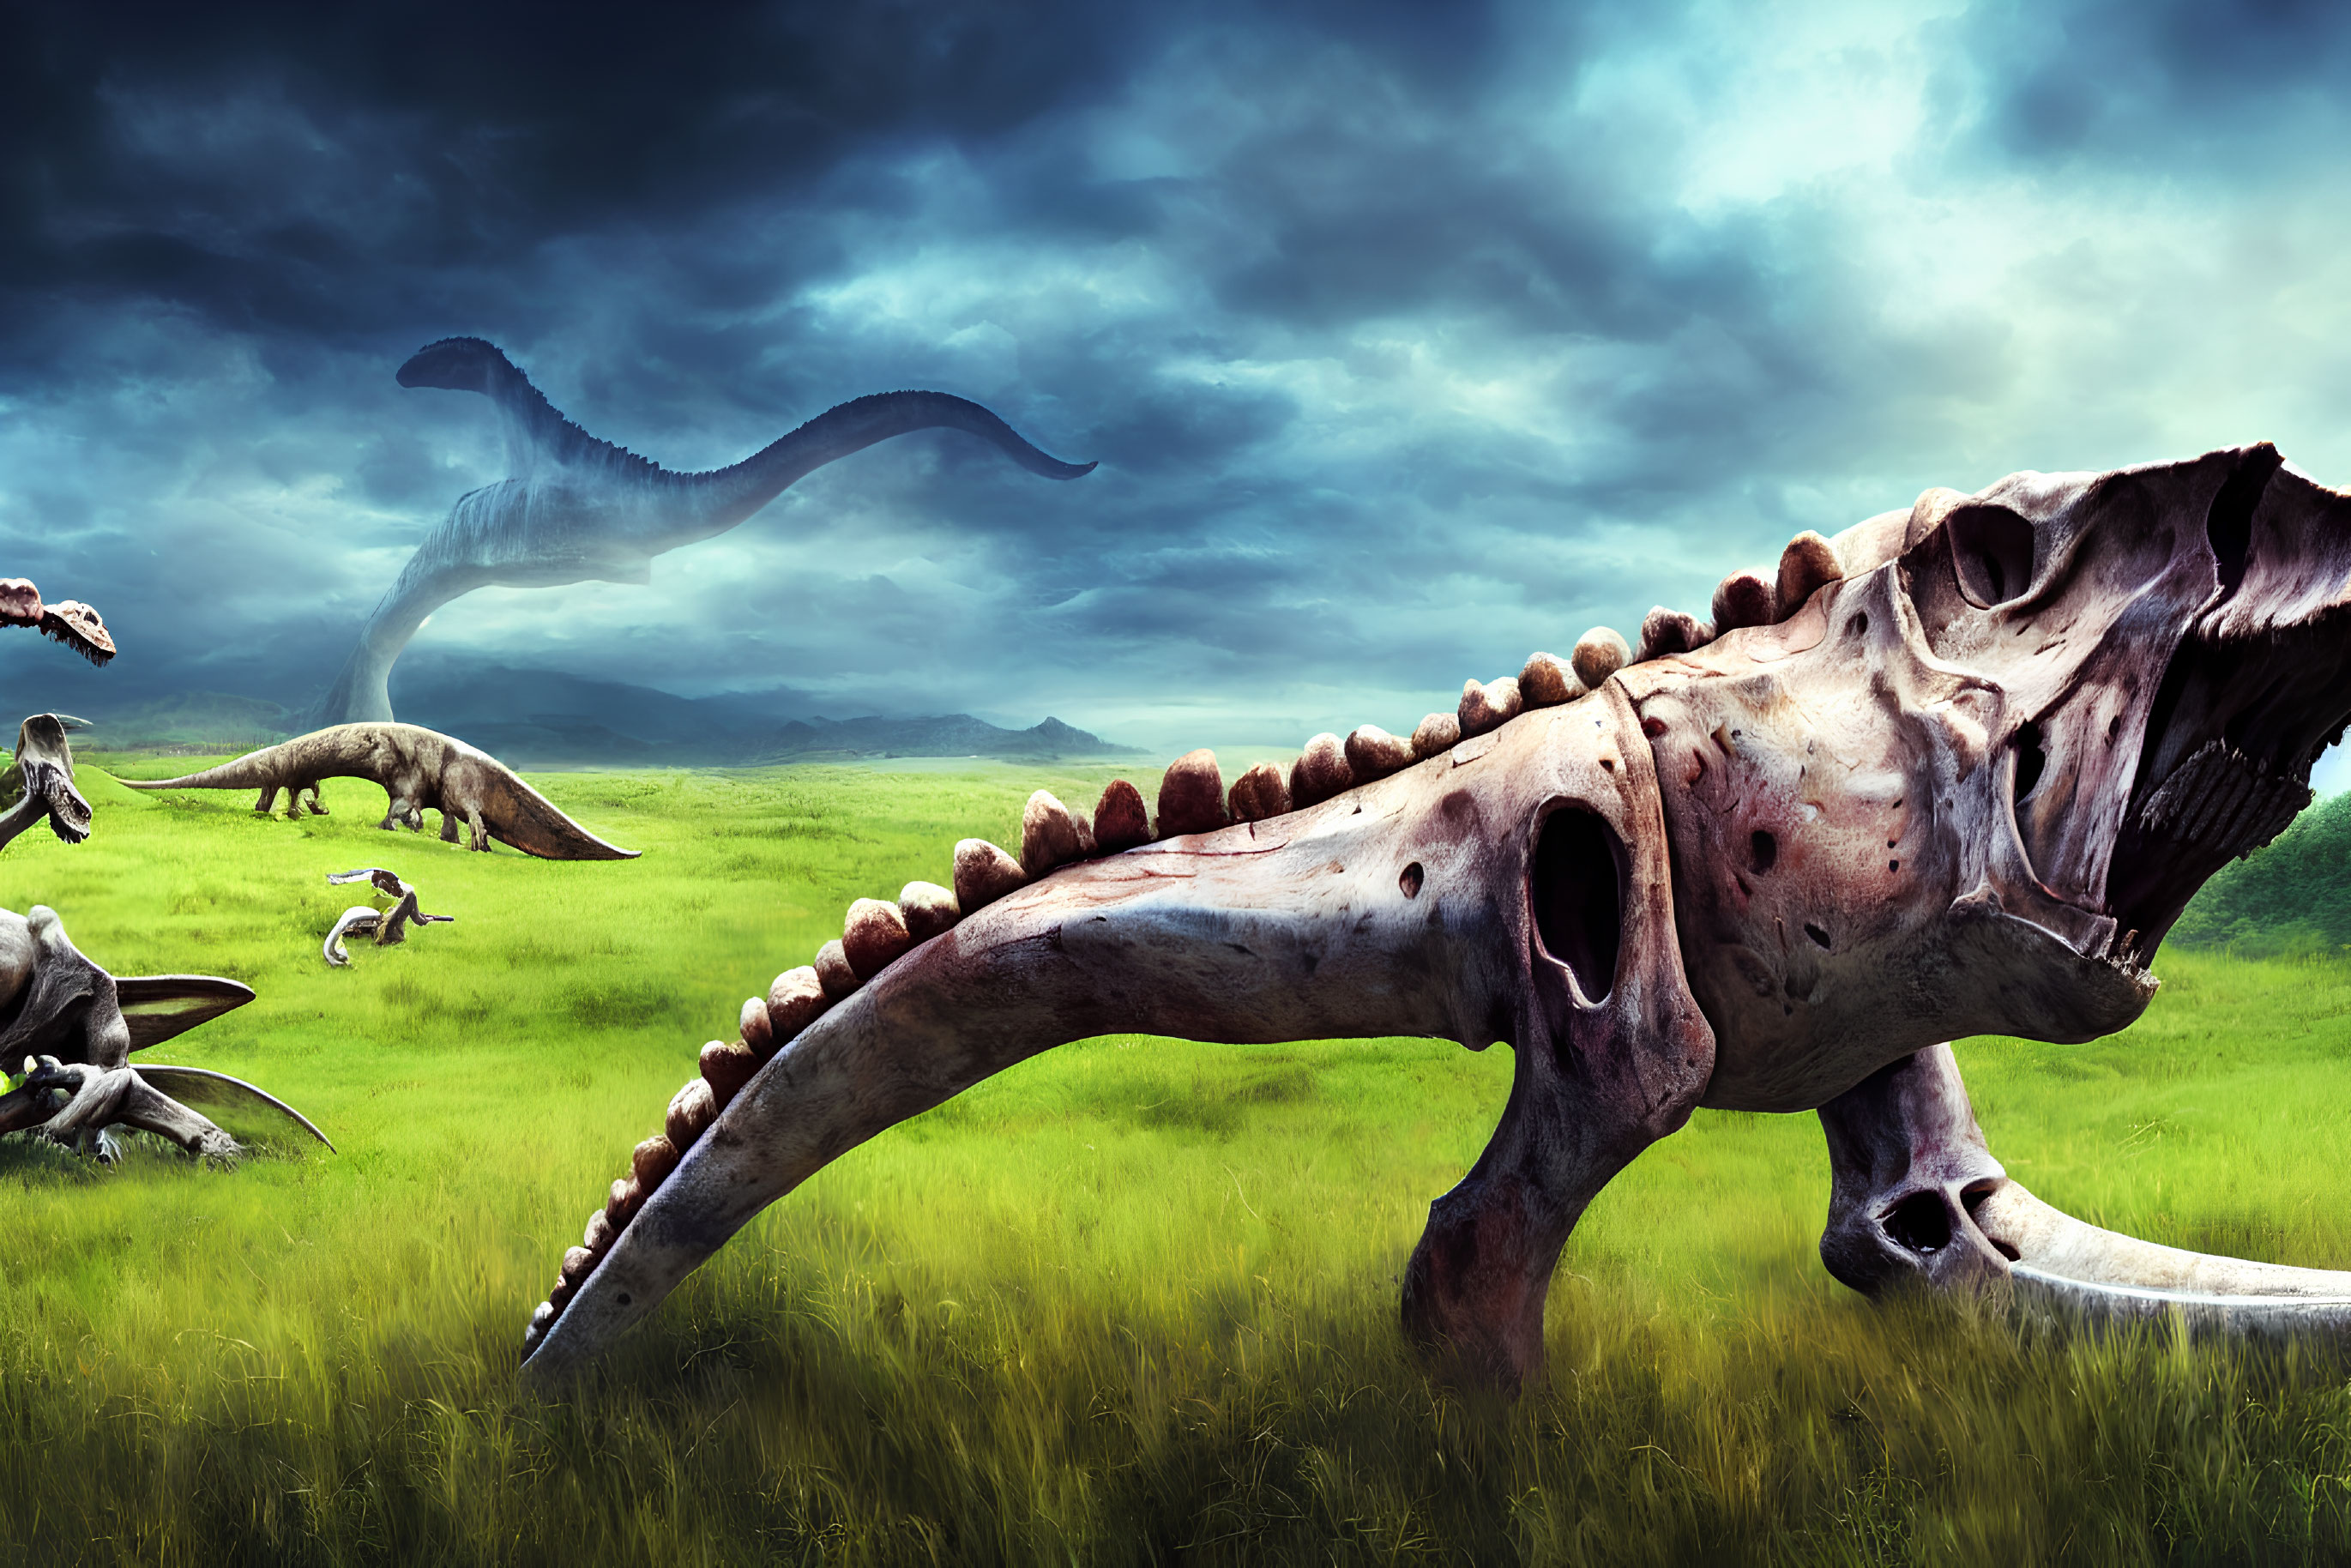 Dinosaur-themed landscape with fossils and dramatic sky